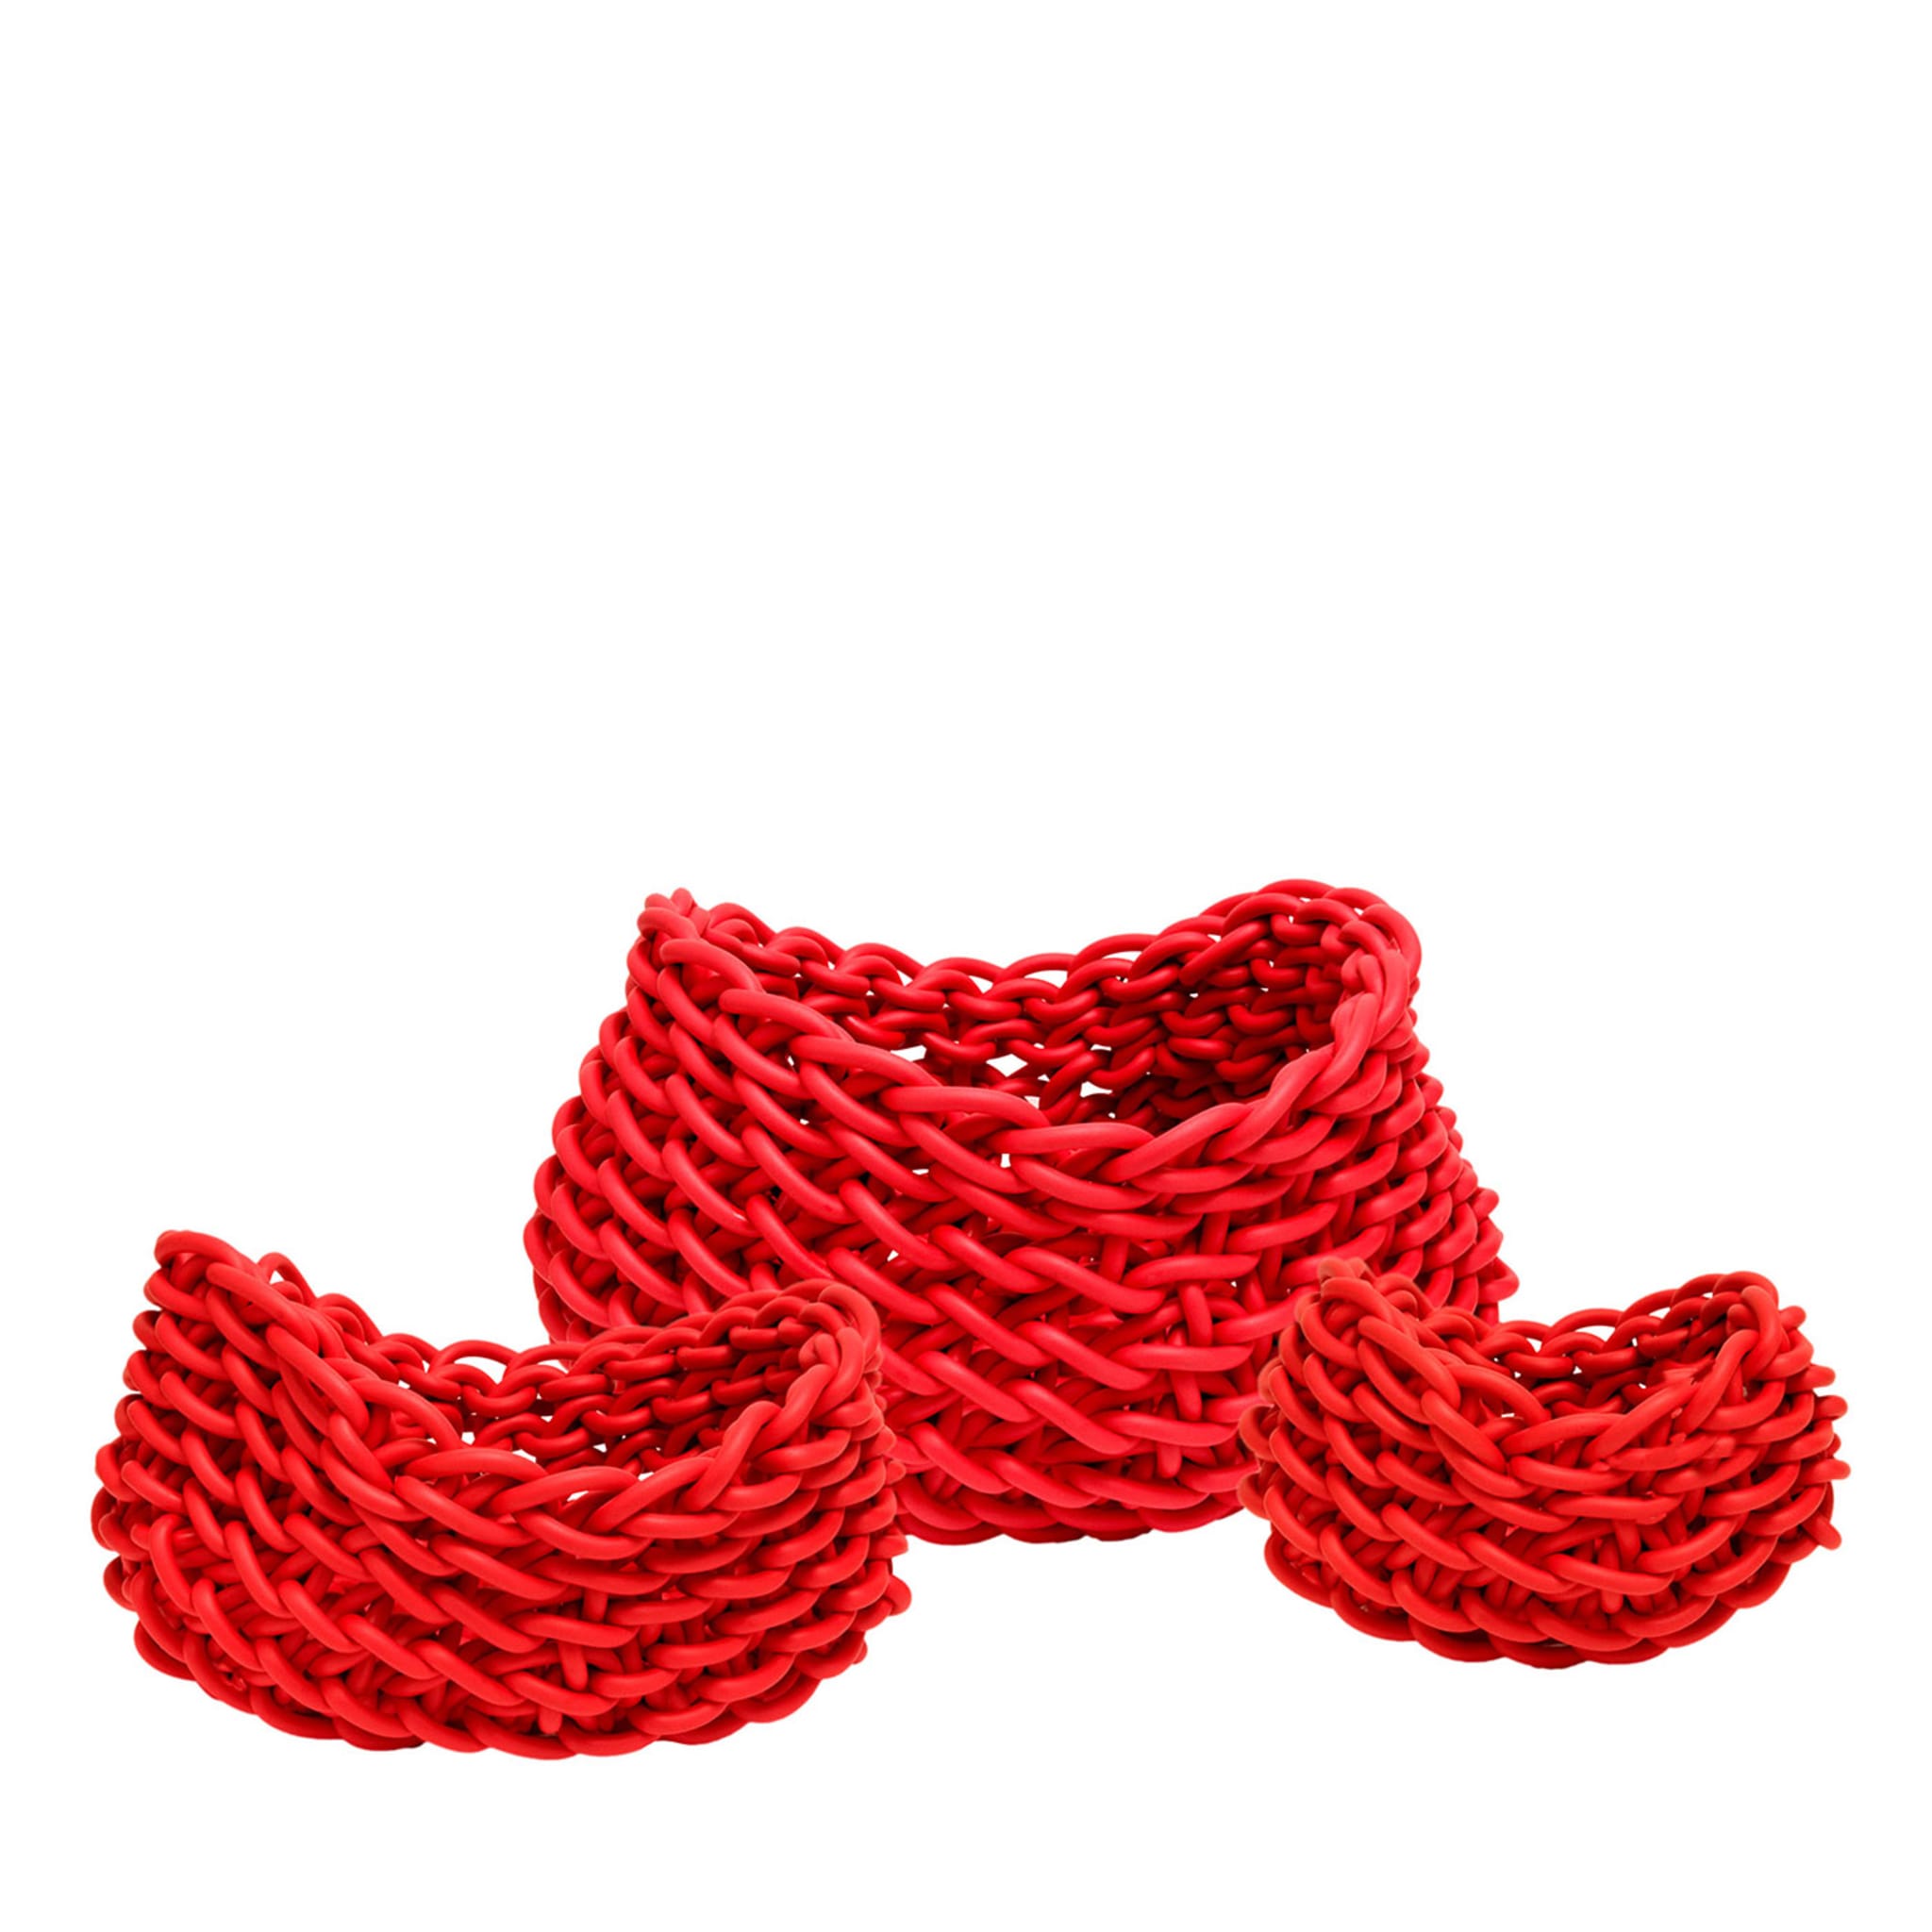 Barca Set of 3 Red Baskets by Rosanna Contadini - Main view